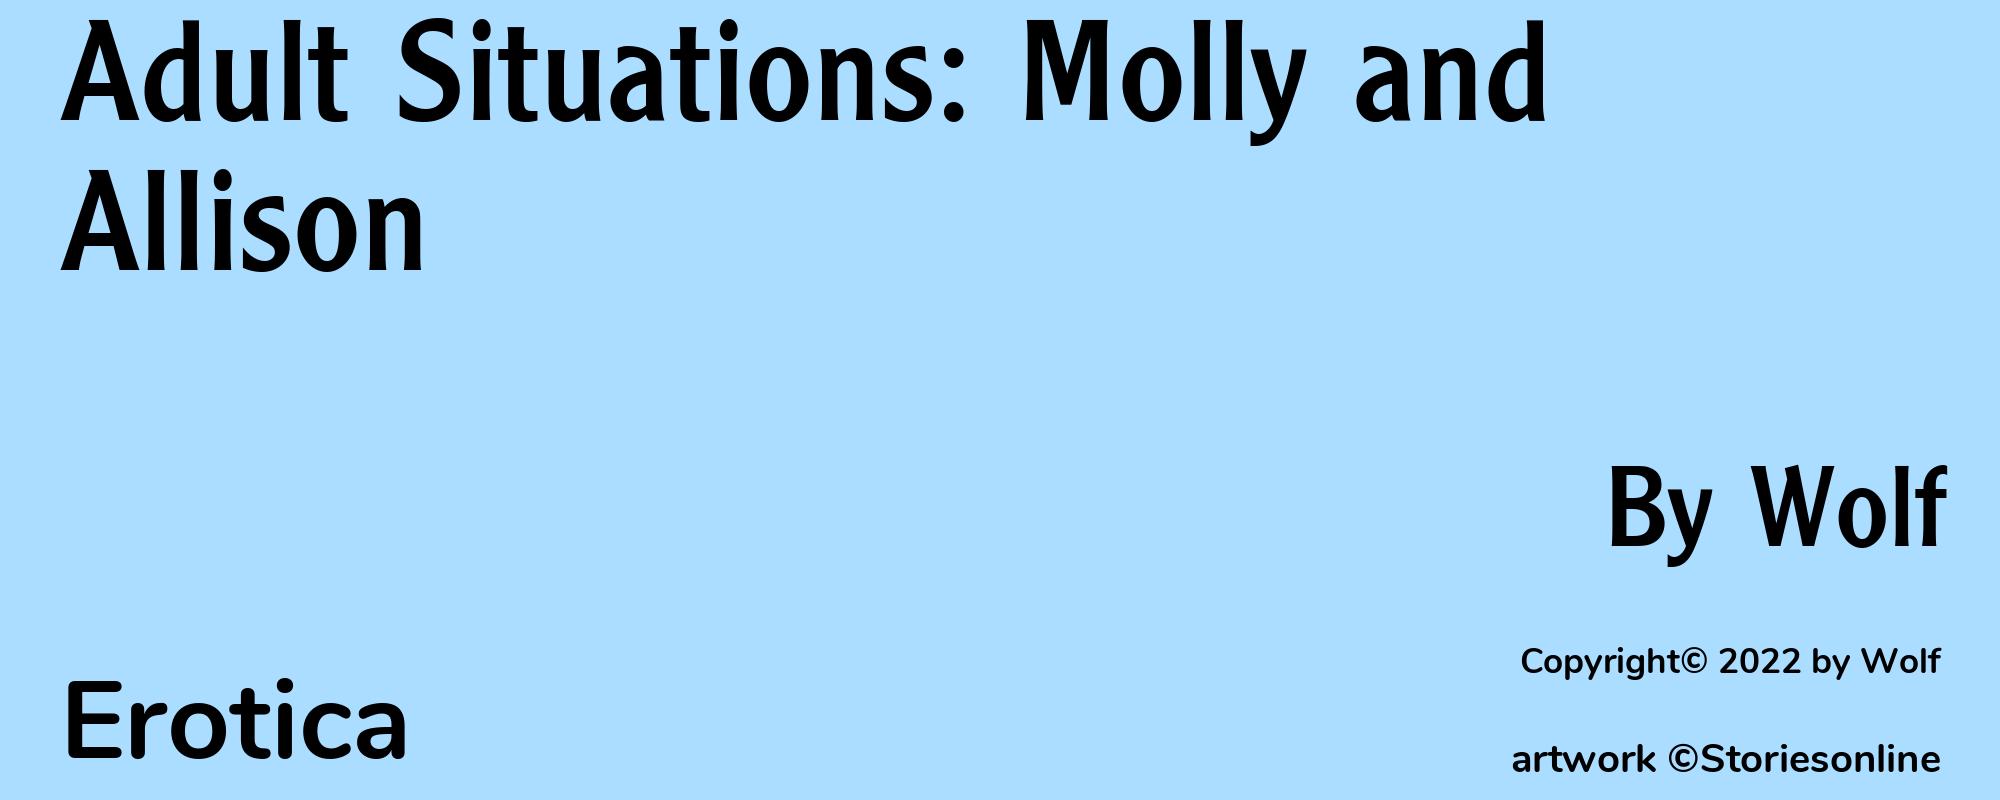 Adult Situations: Molly and Allison - Cover